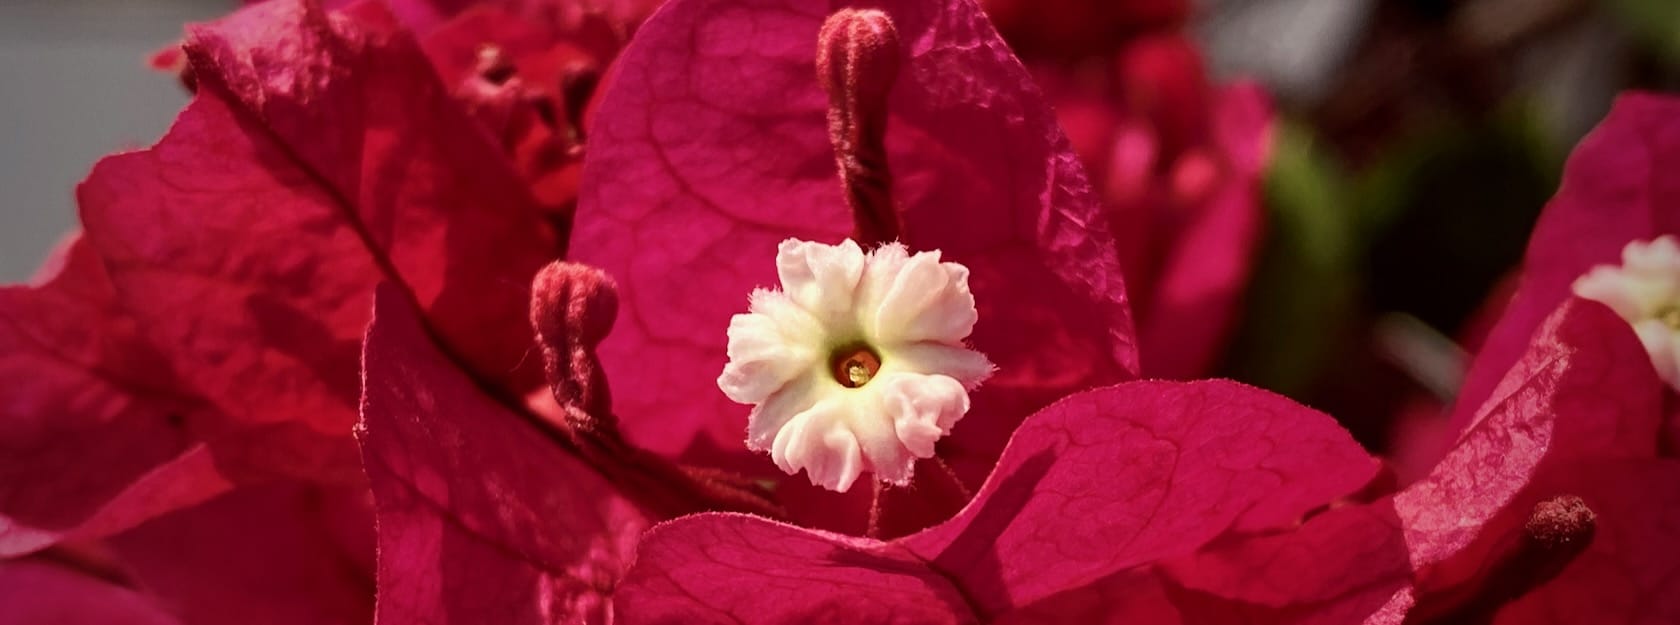 Looking at a single white flower on a magenta bougainvillea